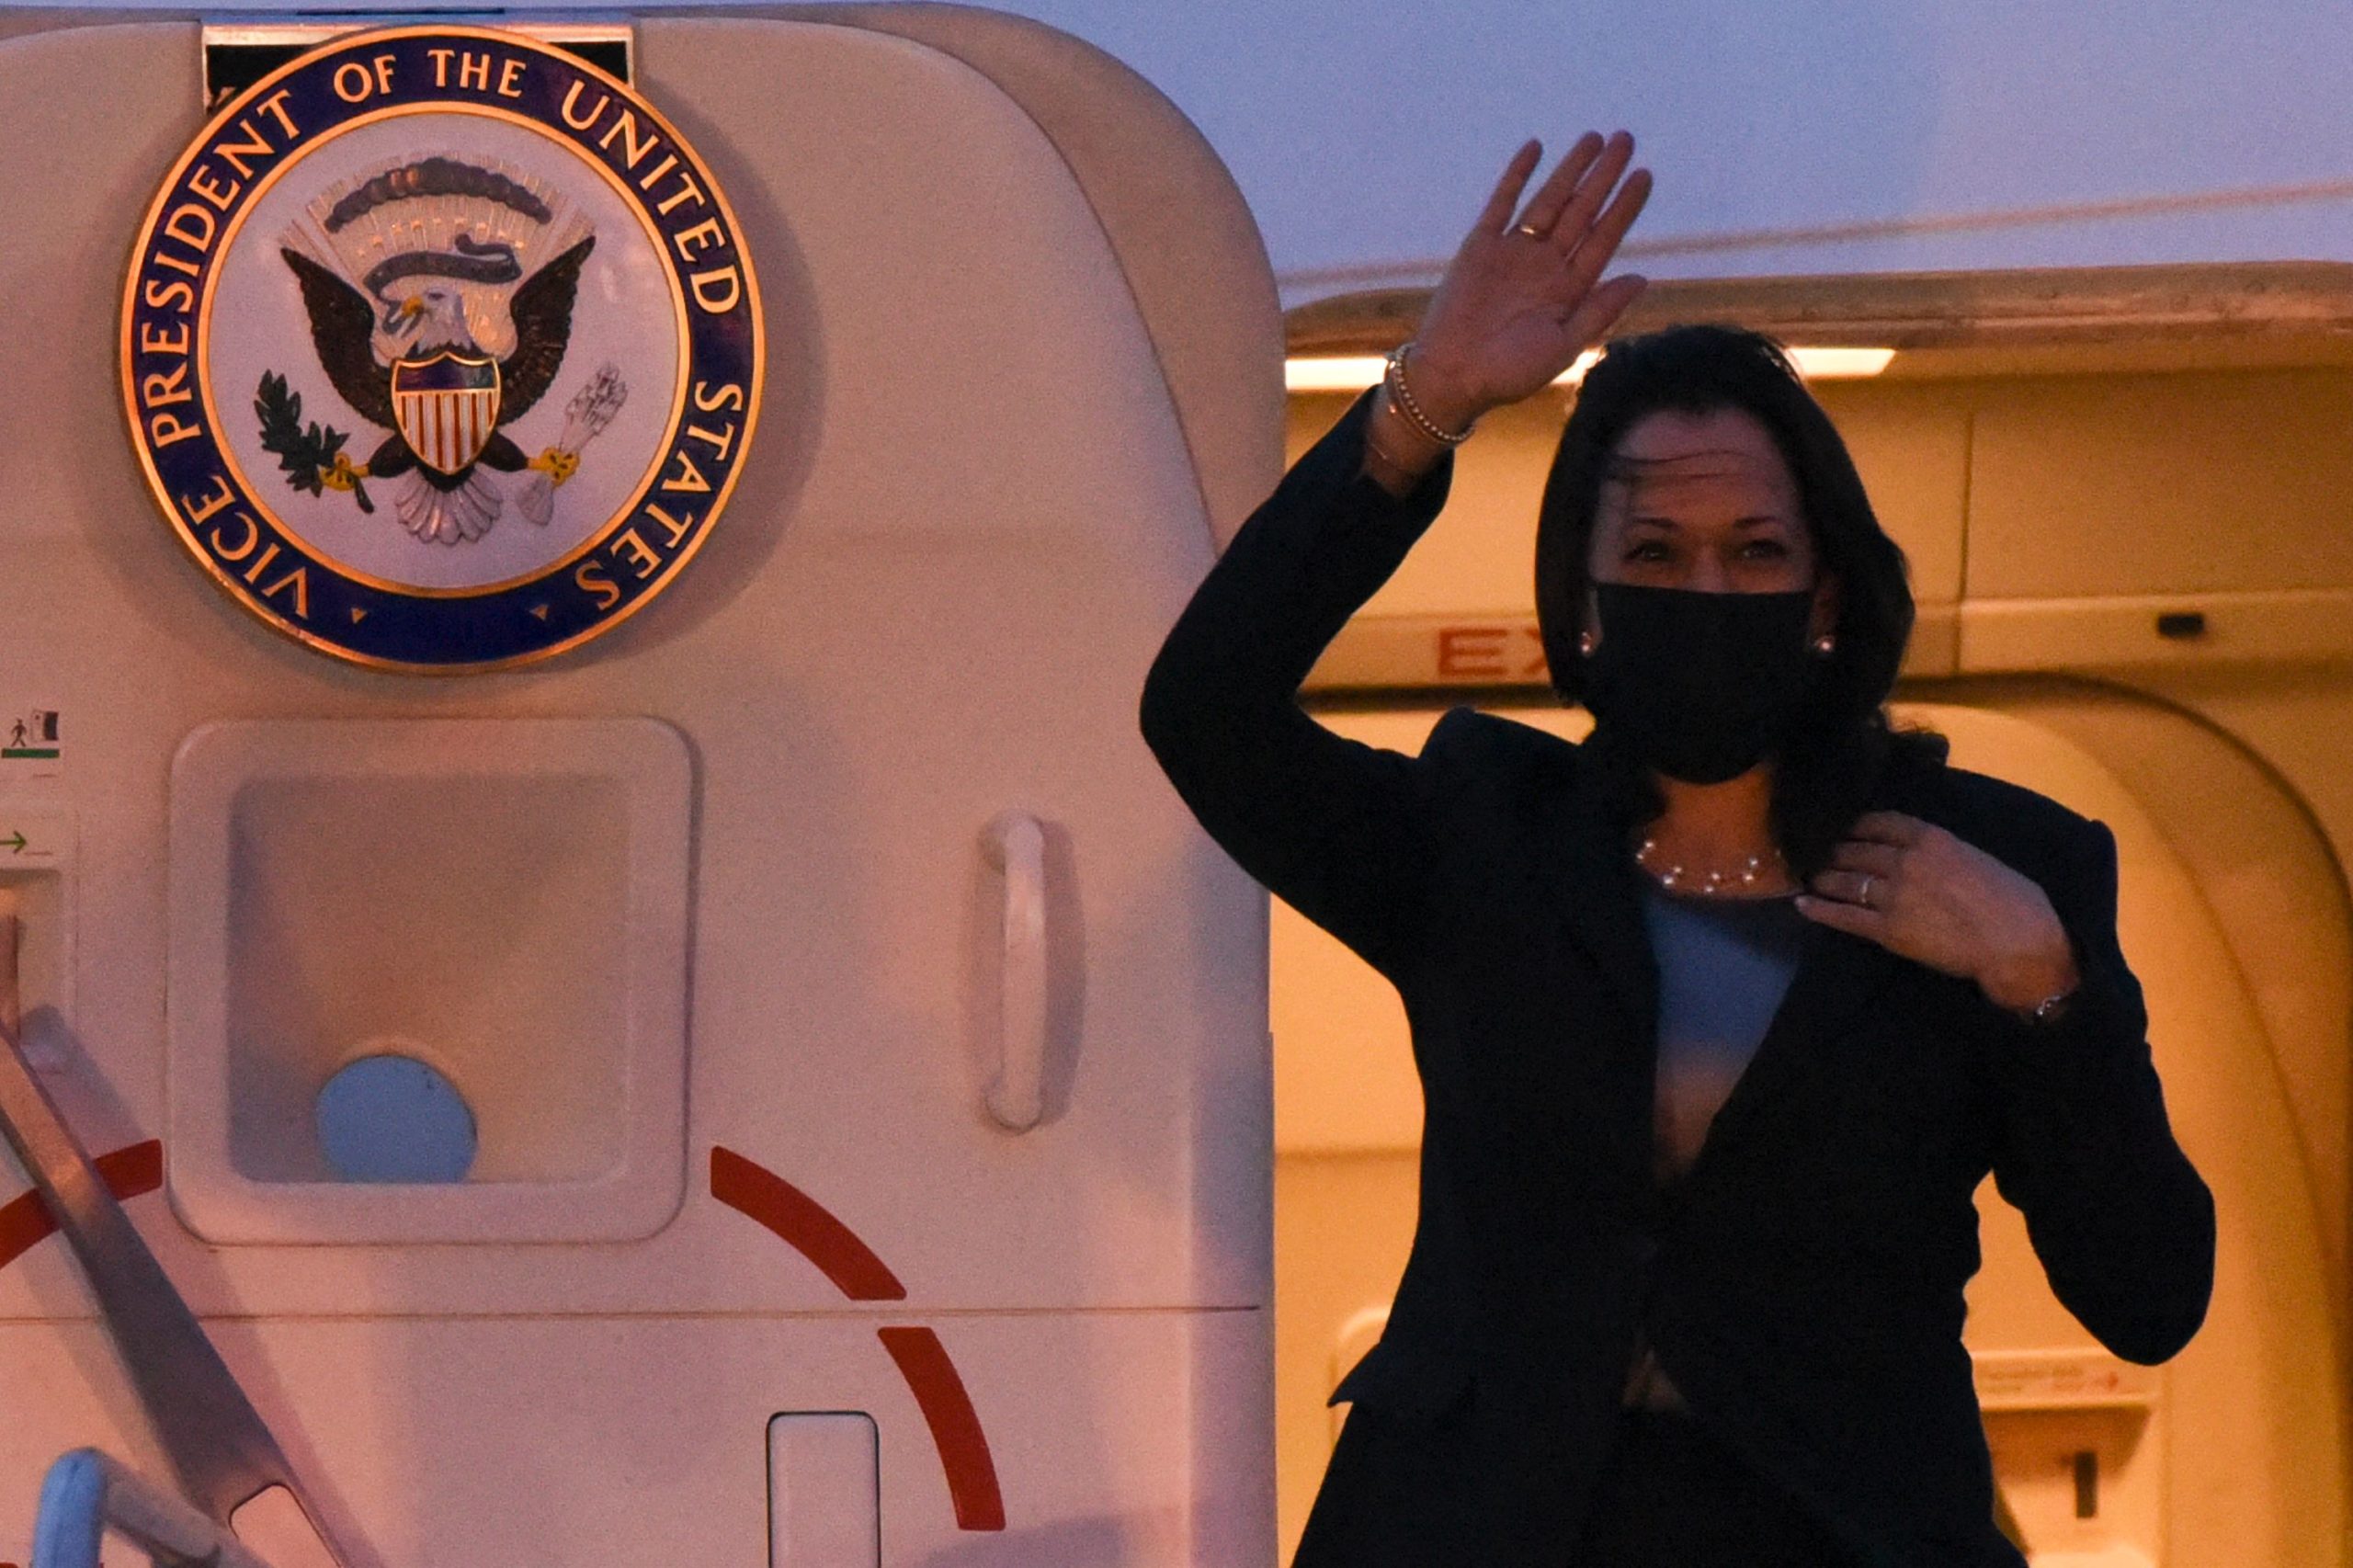 US Vice President Kamala Harris waves upon arrival at the Air Force Base in Guatemala City, on June 6, 2021. - The Vice-President of the United States, Kamala Harris, arrives in Guatemala this Sunday, on her first trip to Latin America, to address issues related to the growing migration to her country and the fight against corruption. (Photo by Orlando ESTRADA / AFP) (Photo by ORLANDO ESTRADA/AFP via Getty Images)